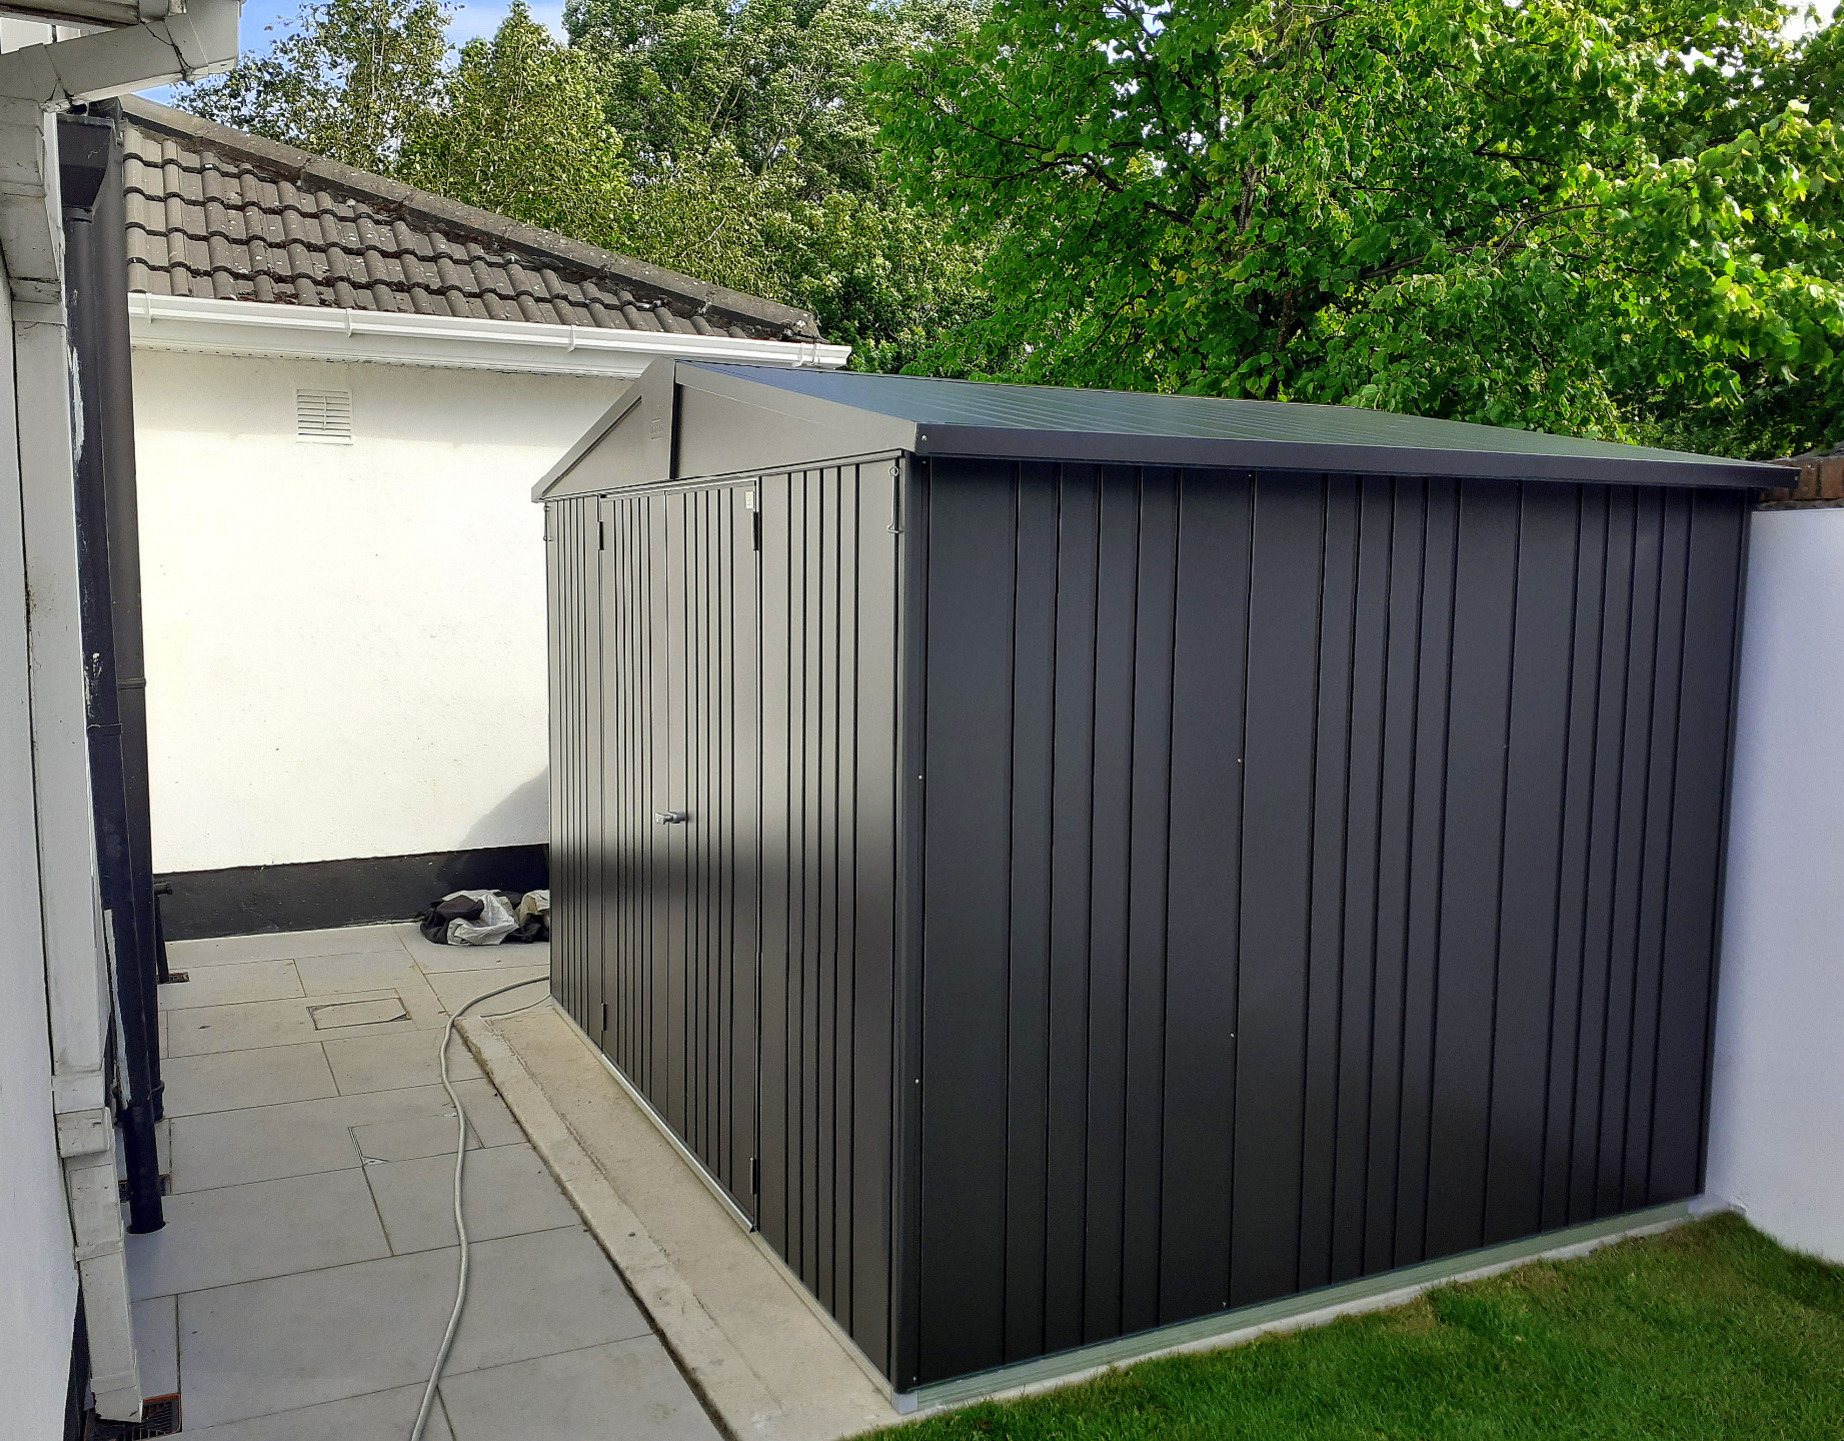 The Biohort Europa Size 5 Garden Shed in metallic dark grey | Popular Seller offering proven Quality at an Affordable Price | FREE Installations in Dublin | Owen Chubb, Tel 087-2306128